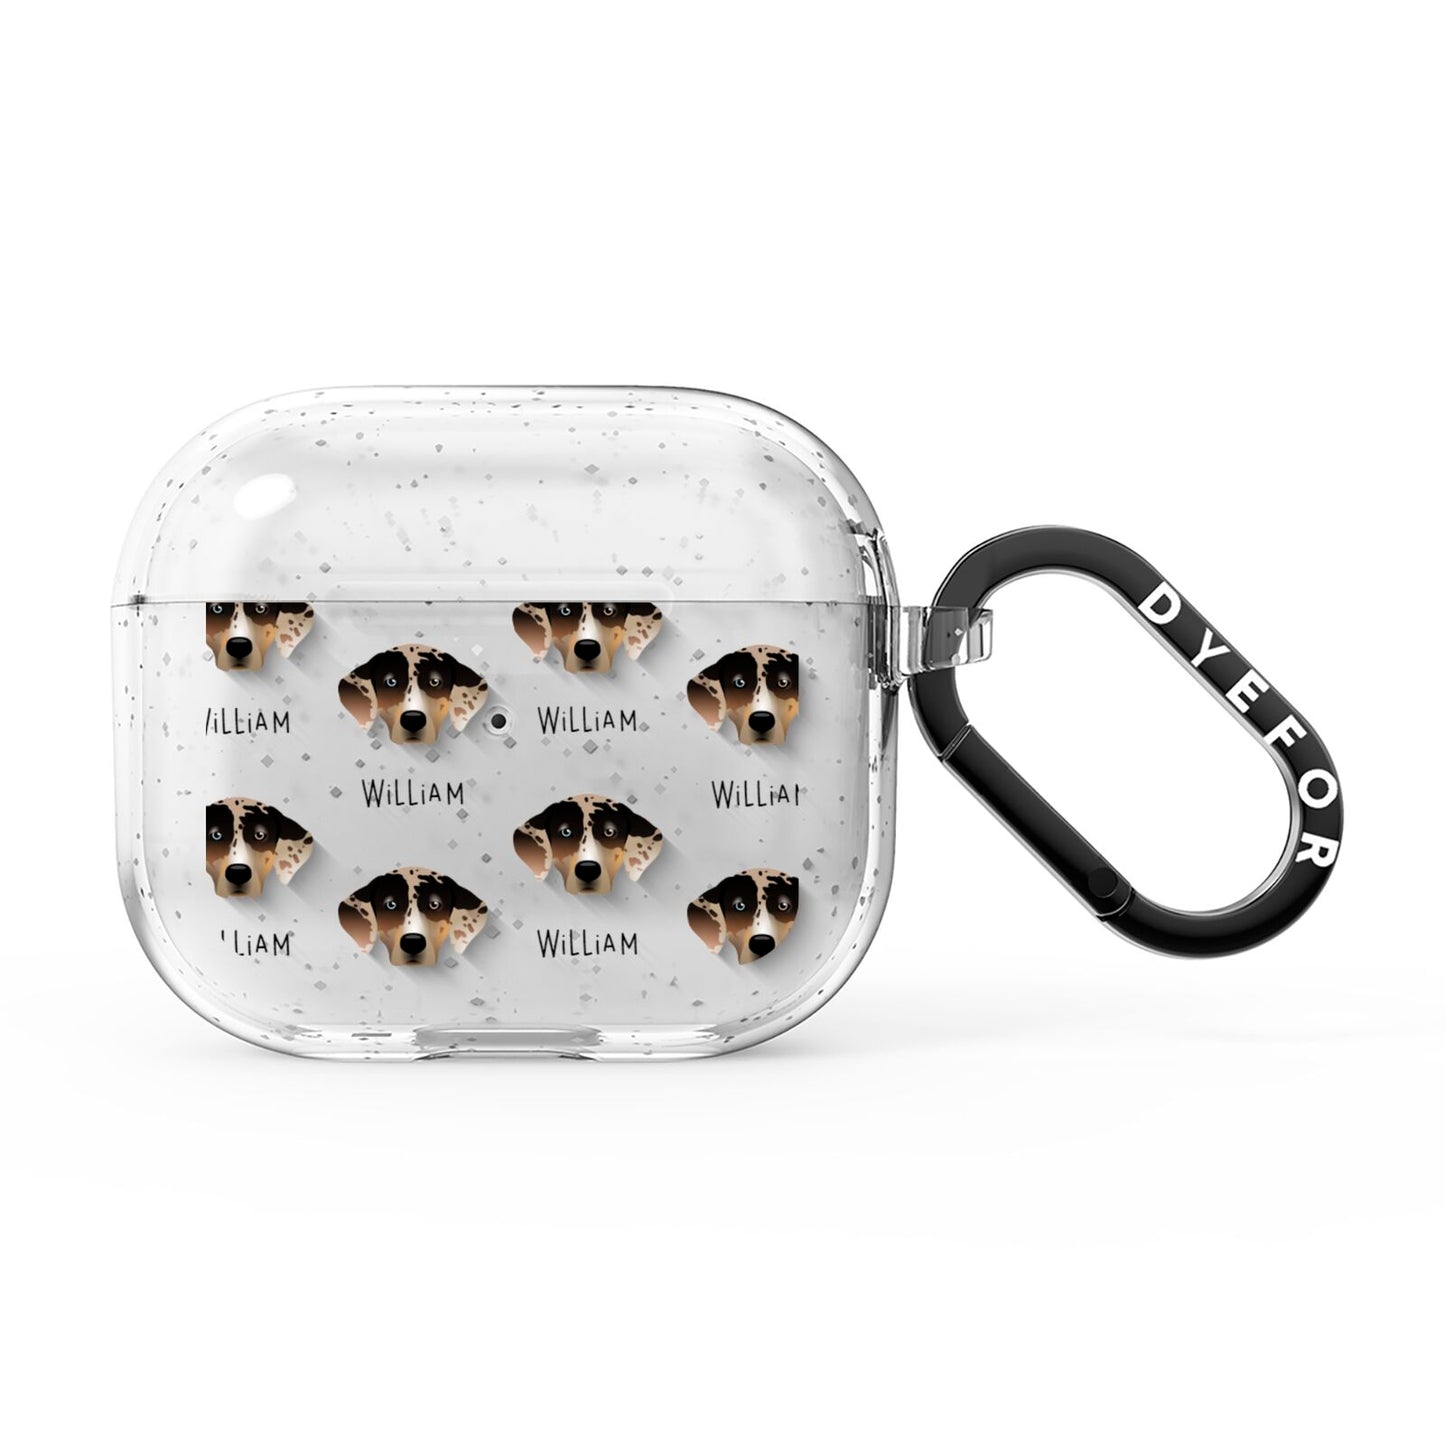 Catahoula Leopard Dog Icon with Name AirPods Glitter Case 3rd Gen